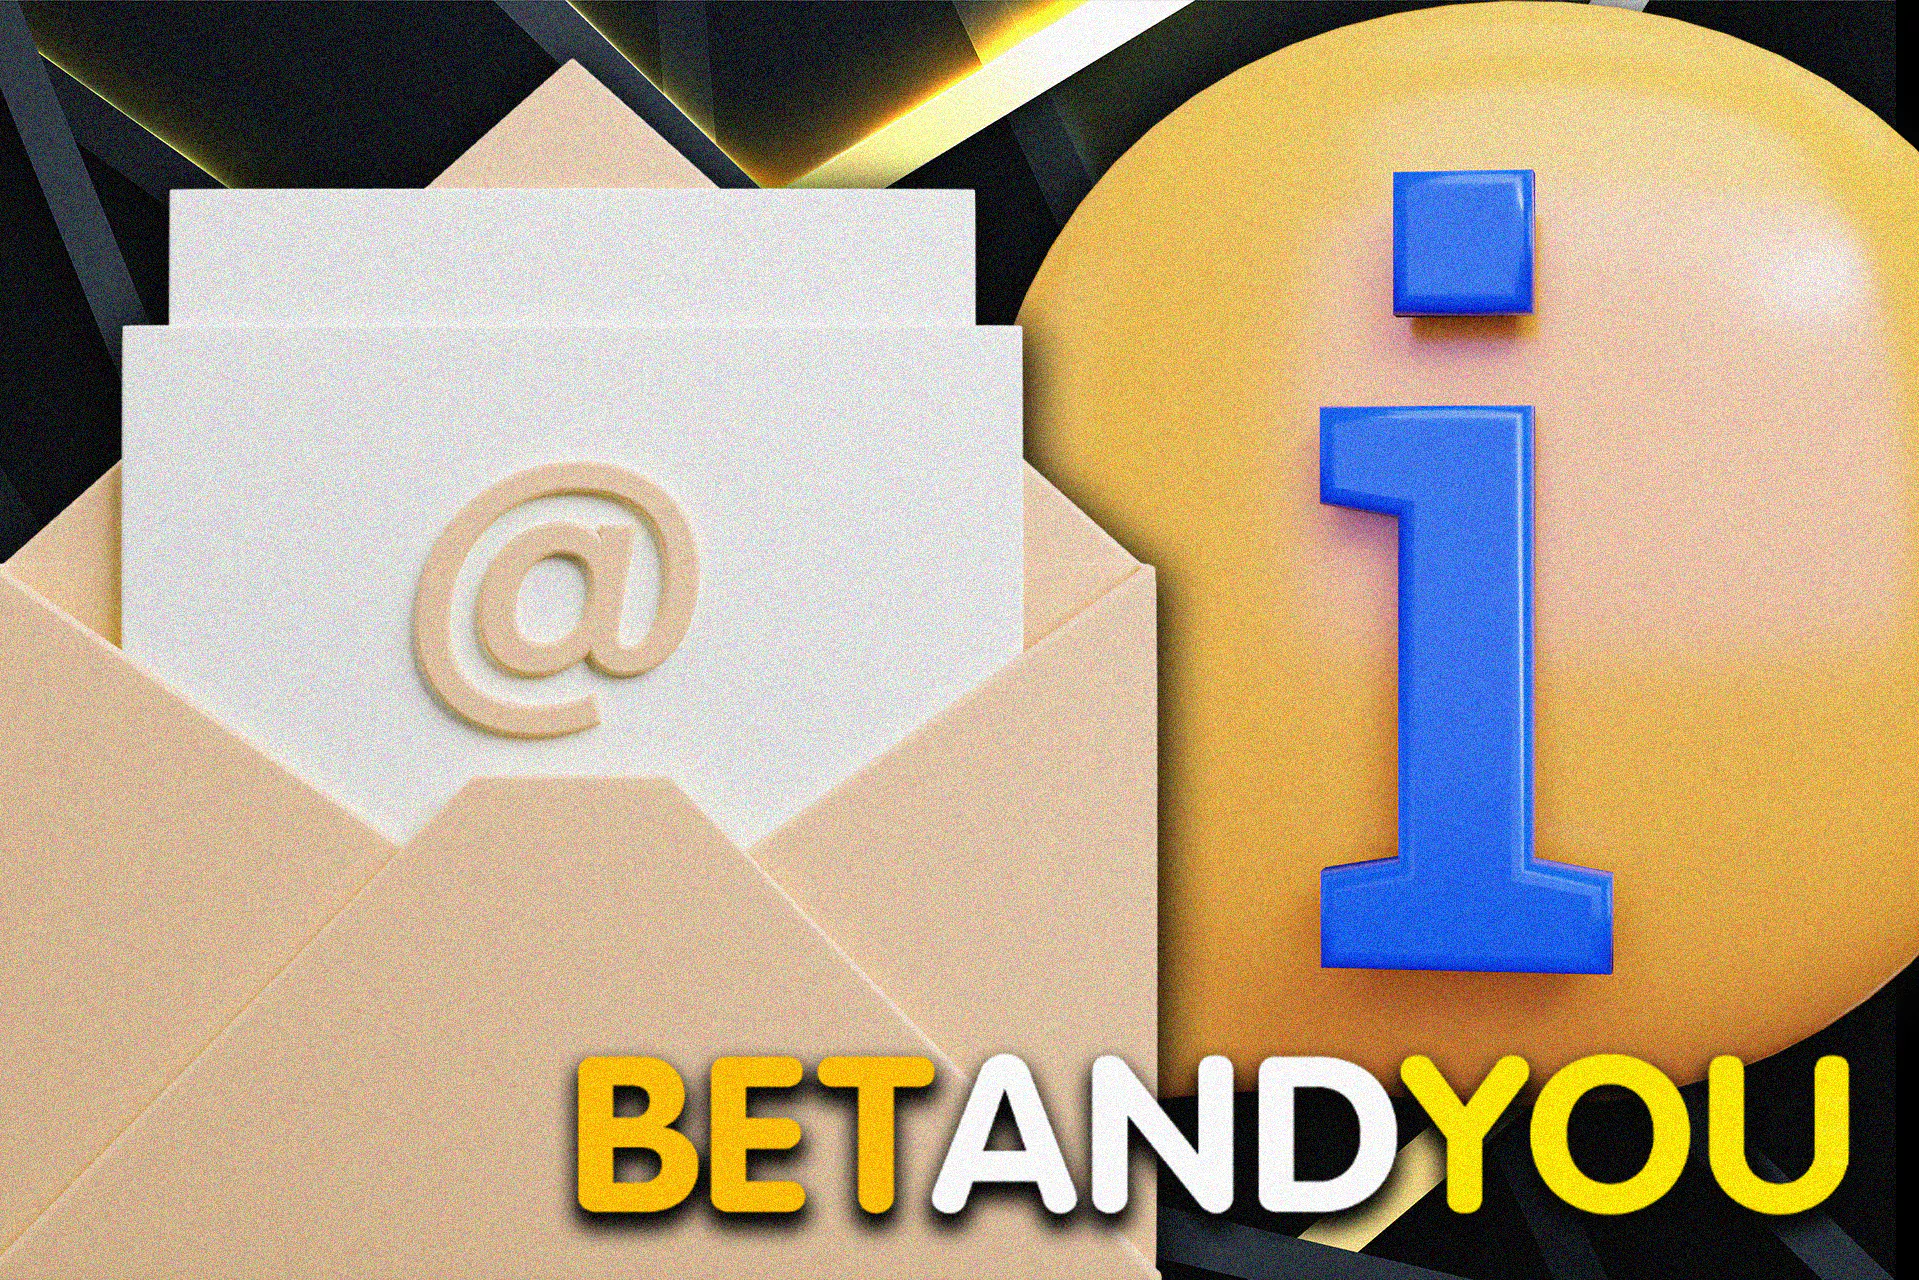 These are the ways to contact the Betandyou team.